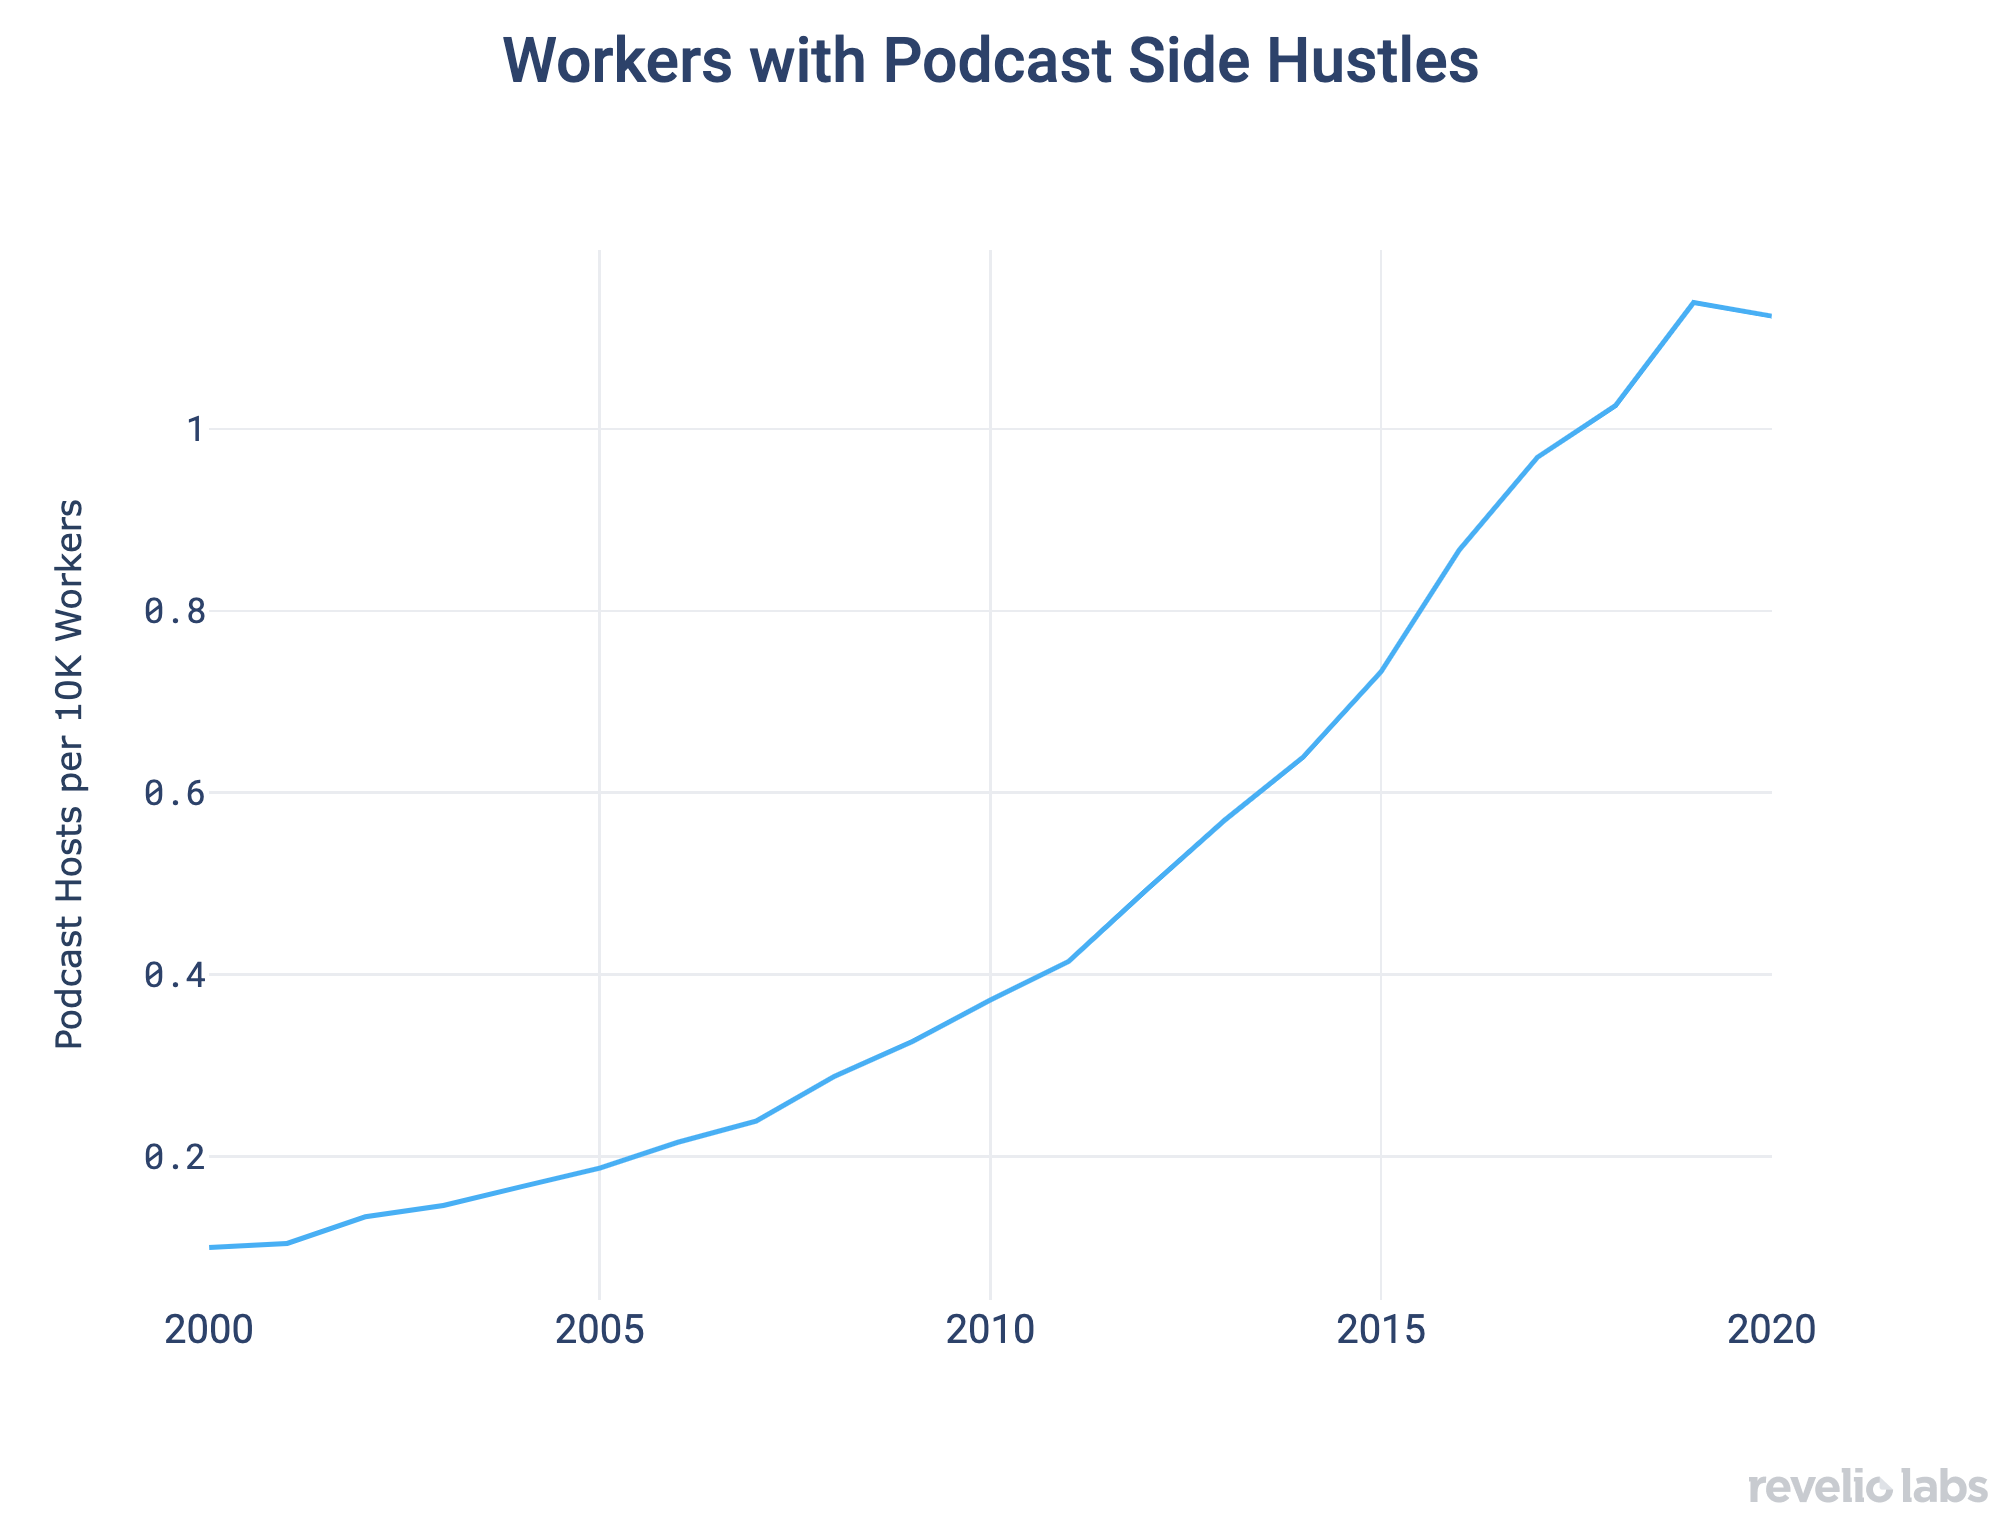 Workers with Podcast Side Hustles